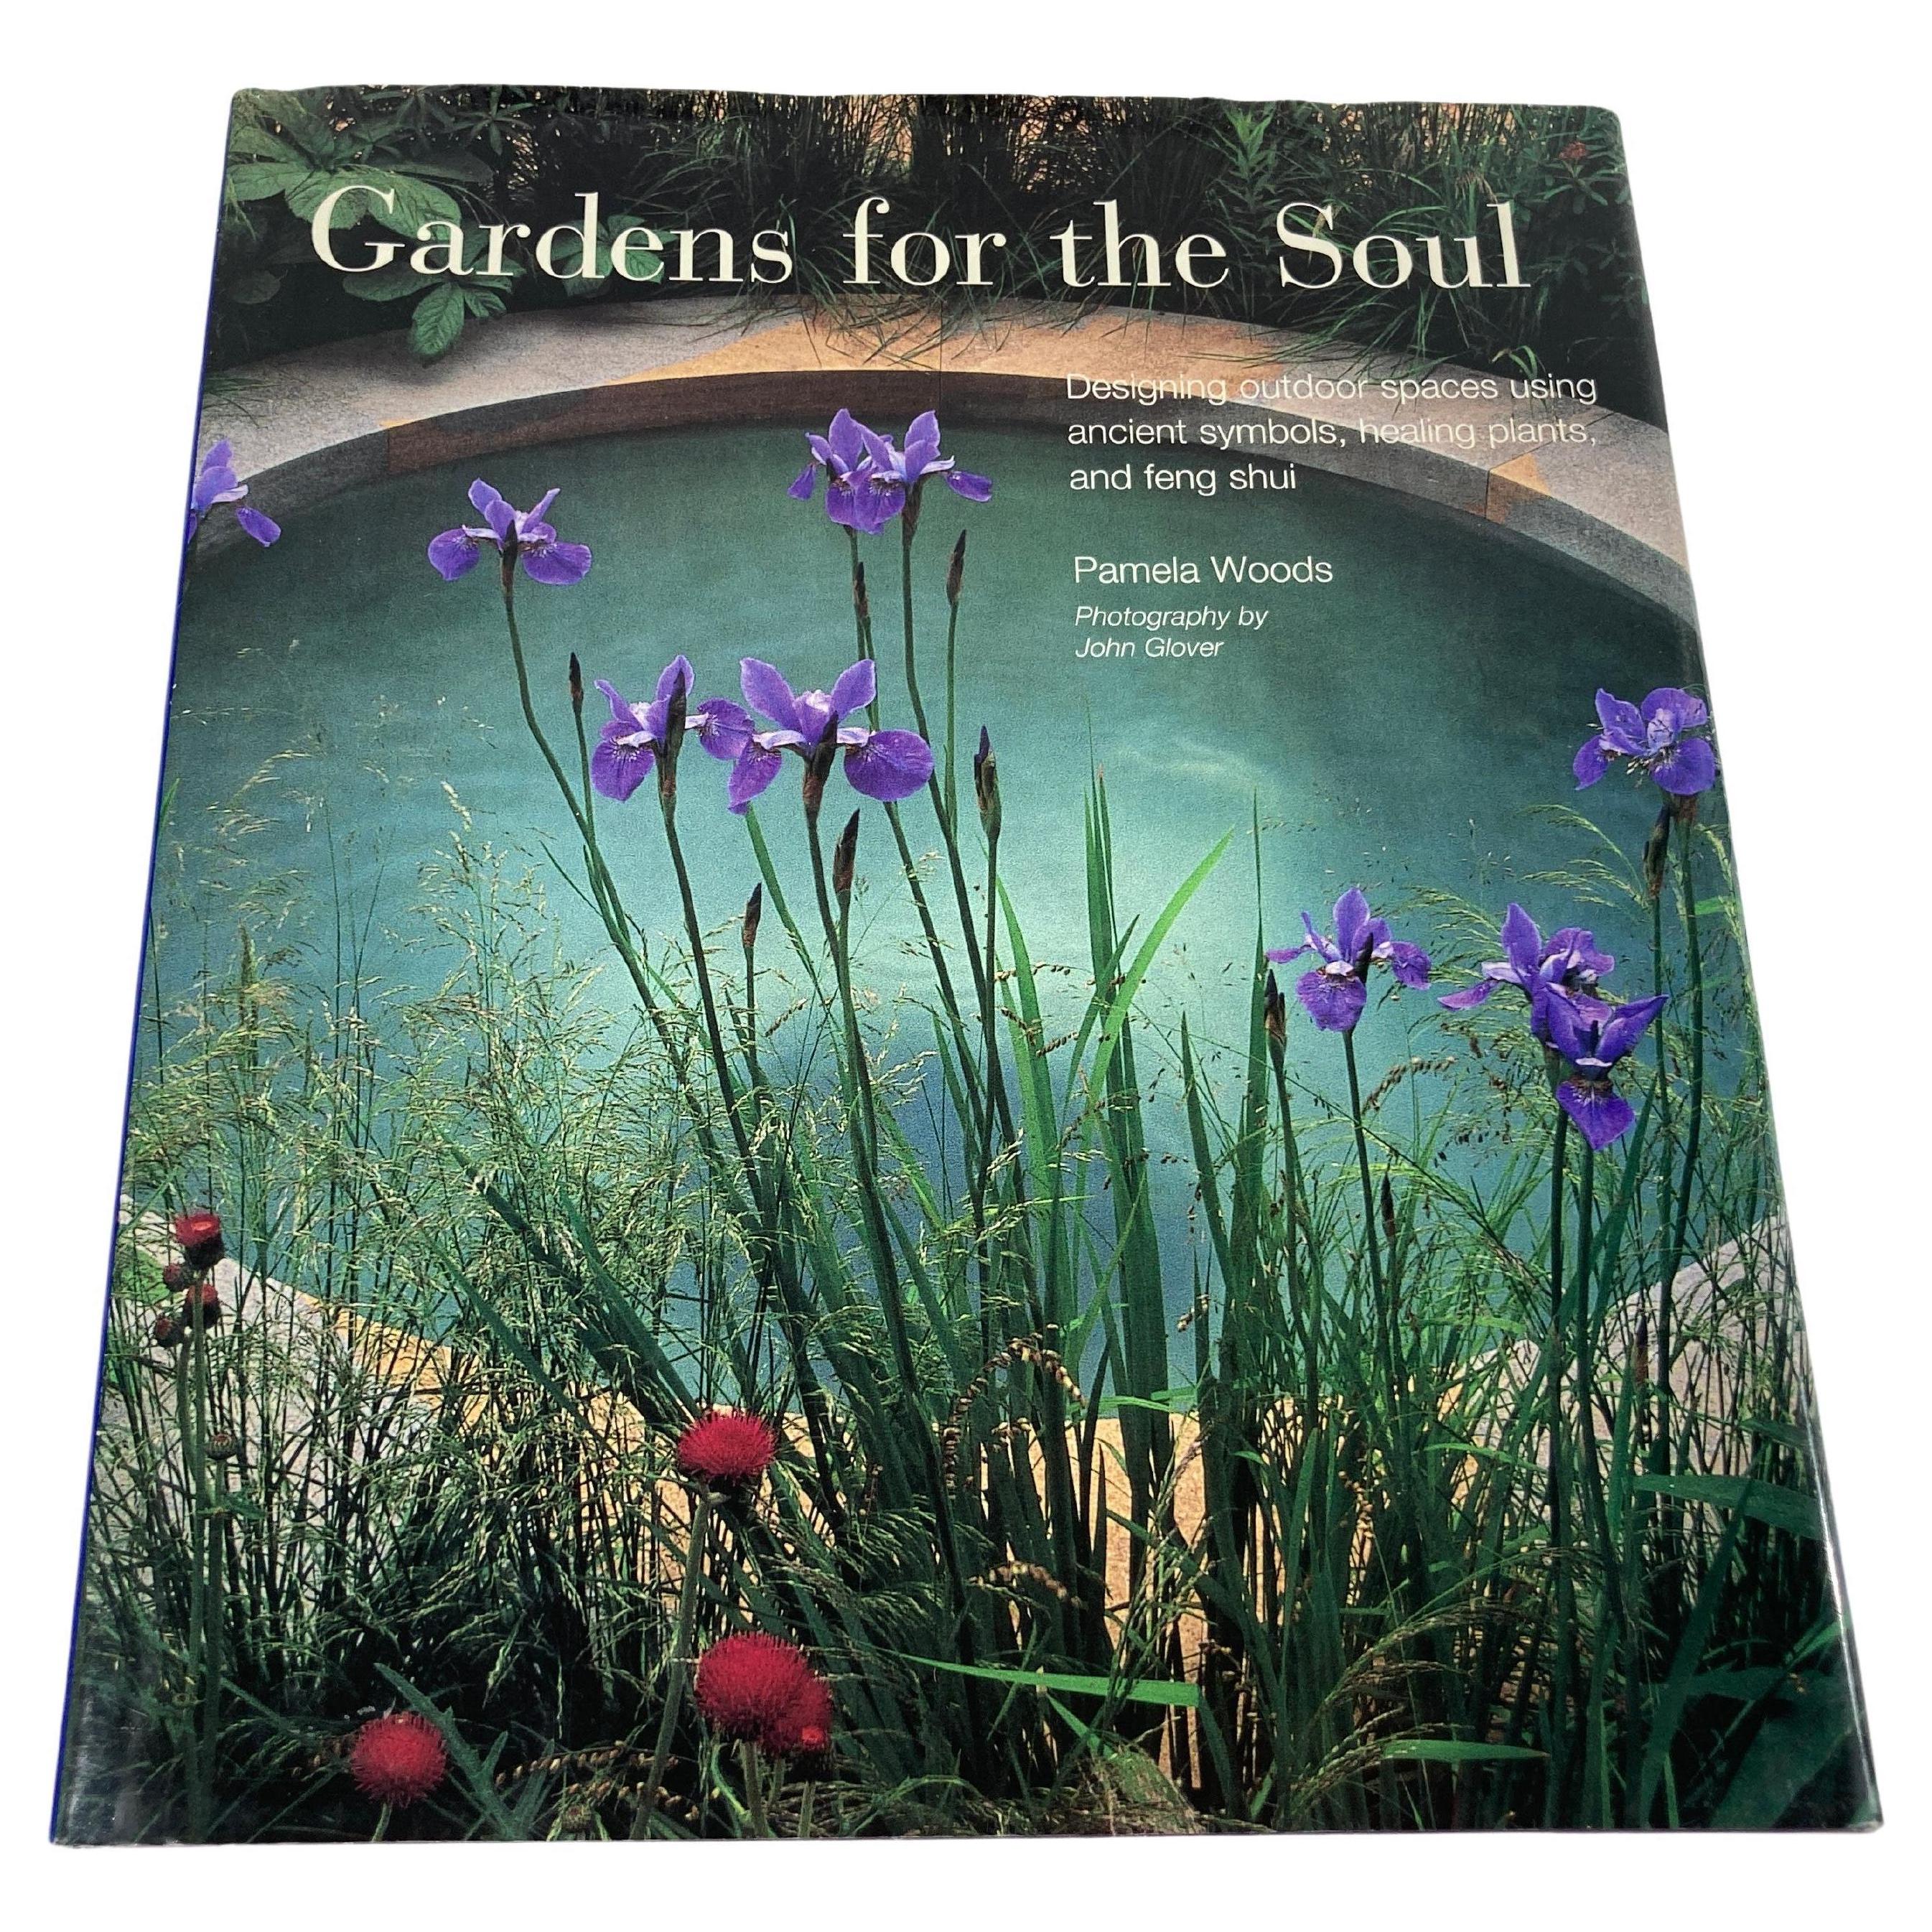 Gardens for the Soul Hardcover Table Book.
Large coffee table book by Pamela Woods
Rizoli International, 2002 - 1st Edition.
Feng shui gardens - 160 pages
Pamela Woods' approach to garden design teaches you how to create a garden that reflects